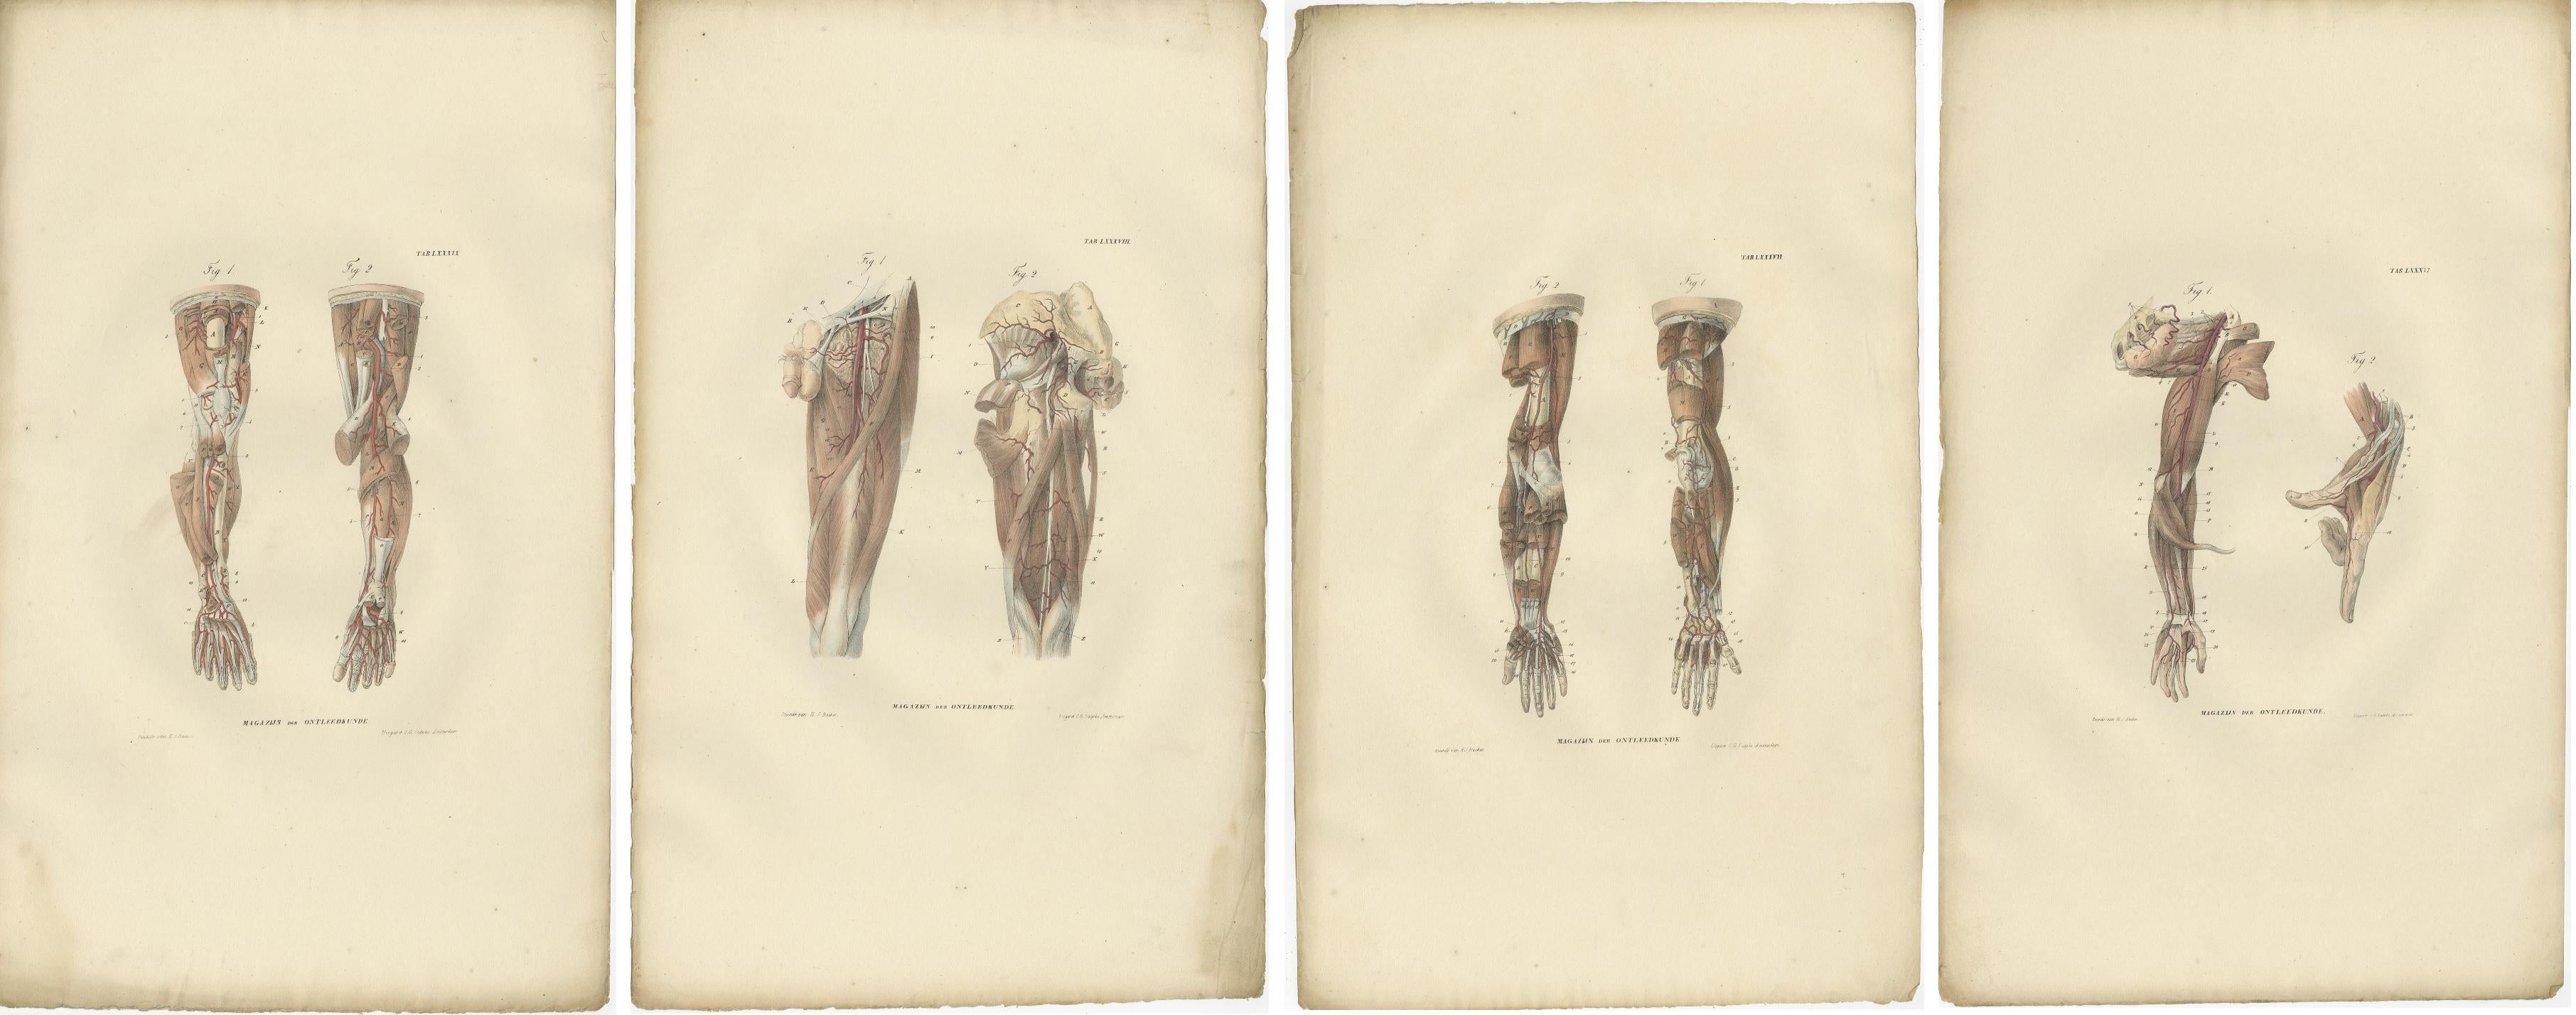 Set of 14 antique anatomy prints of angiology, the medical specialty which studies the diseases of the circulatory system and of the lymphatic system, i.e., arteries, veins and lymphatic vessels, and its diseases. These prints originate from